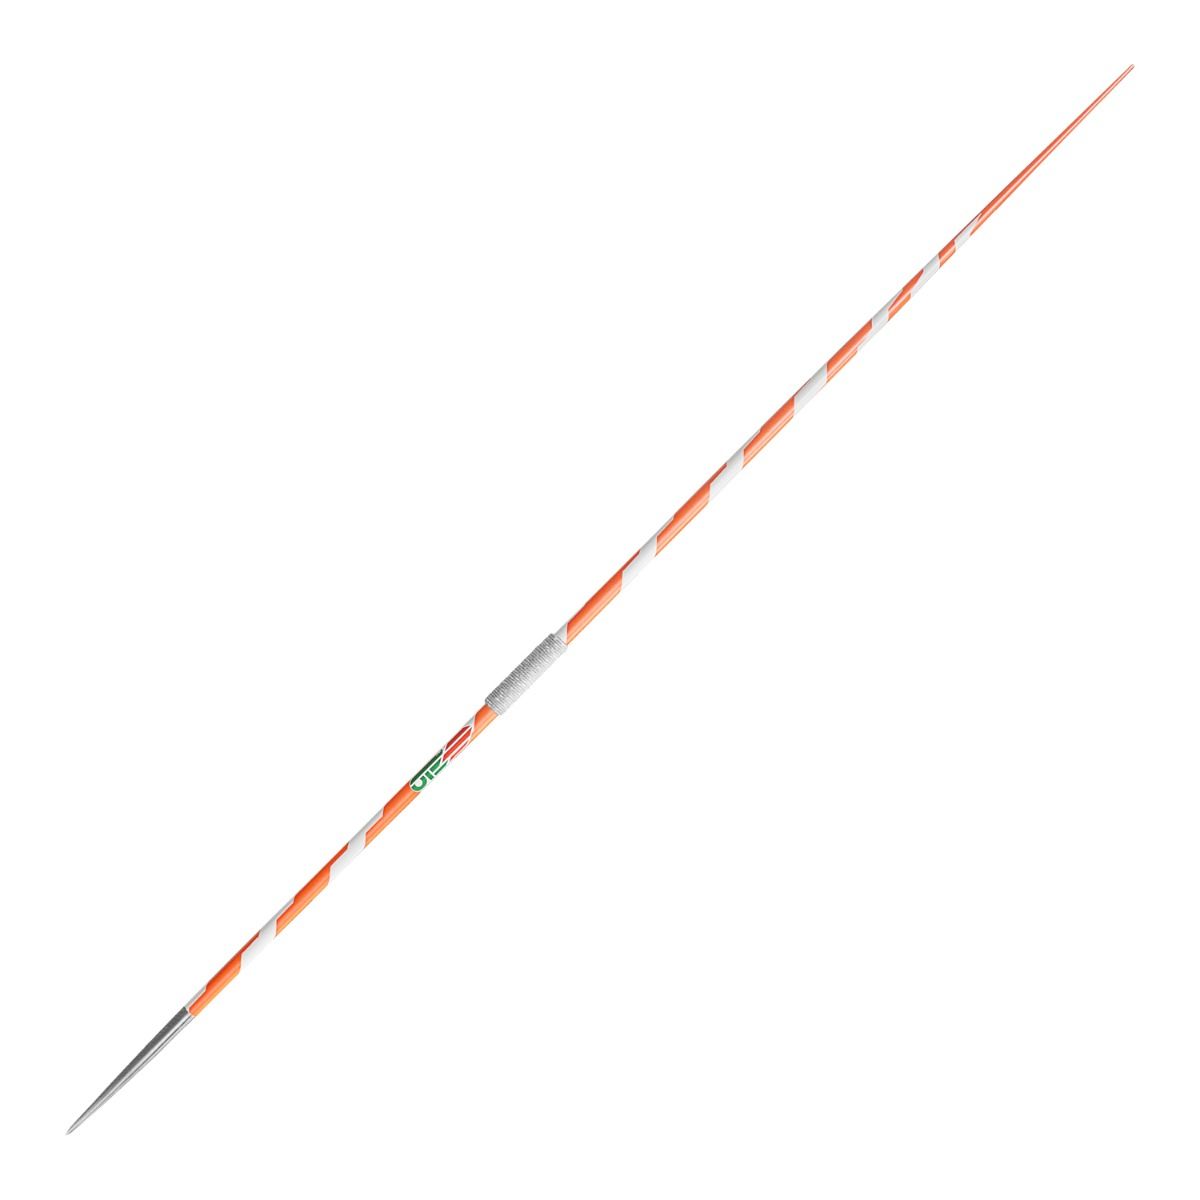 OTE XTRA Tailwind javelin | 800g 80m distance rated | Orange with white spiral and grey grip cord